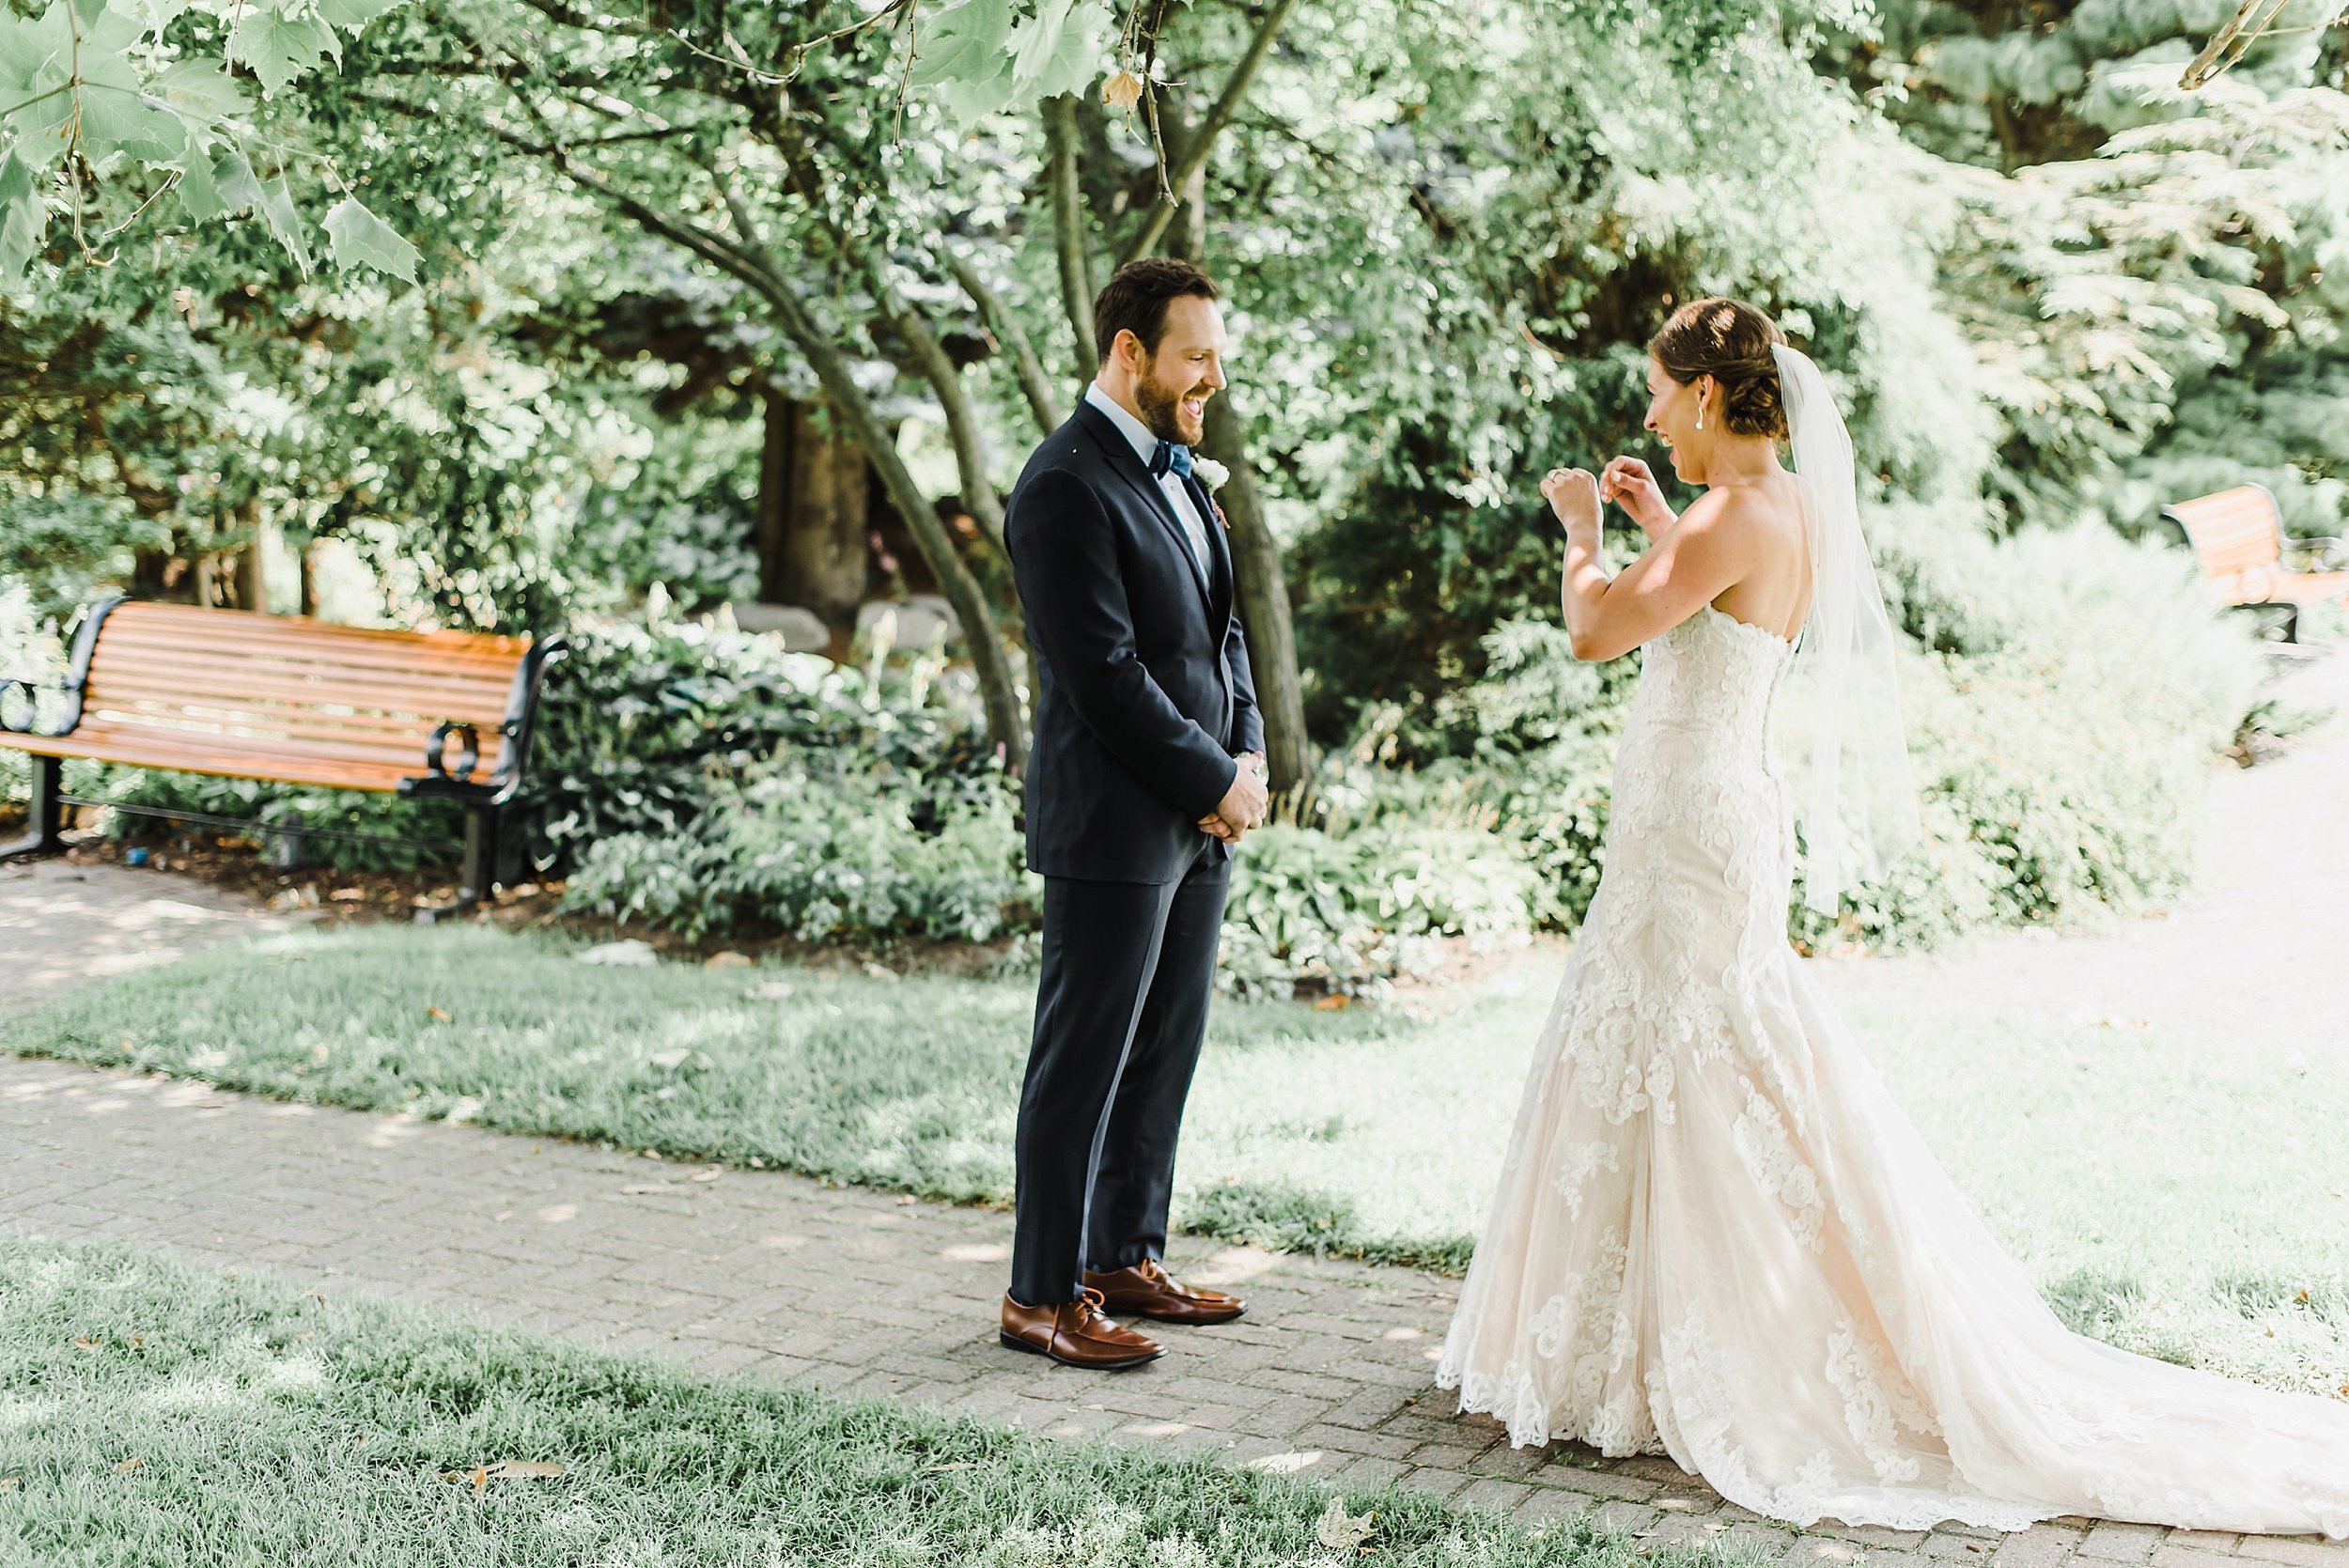  Their first look took place just down the road from their reception space at the Ornamental Gardens.  To say it was an emotional moment is an understatement! 